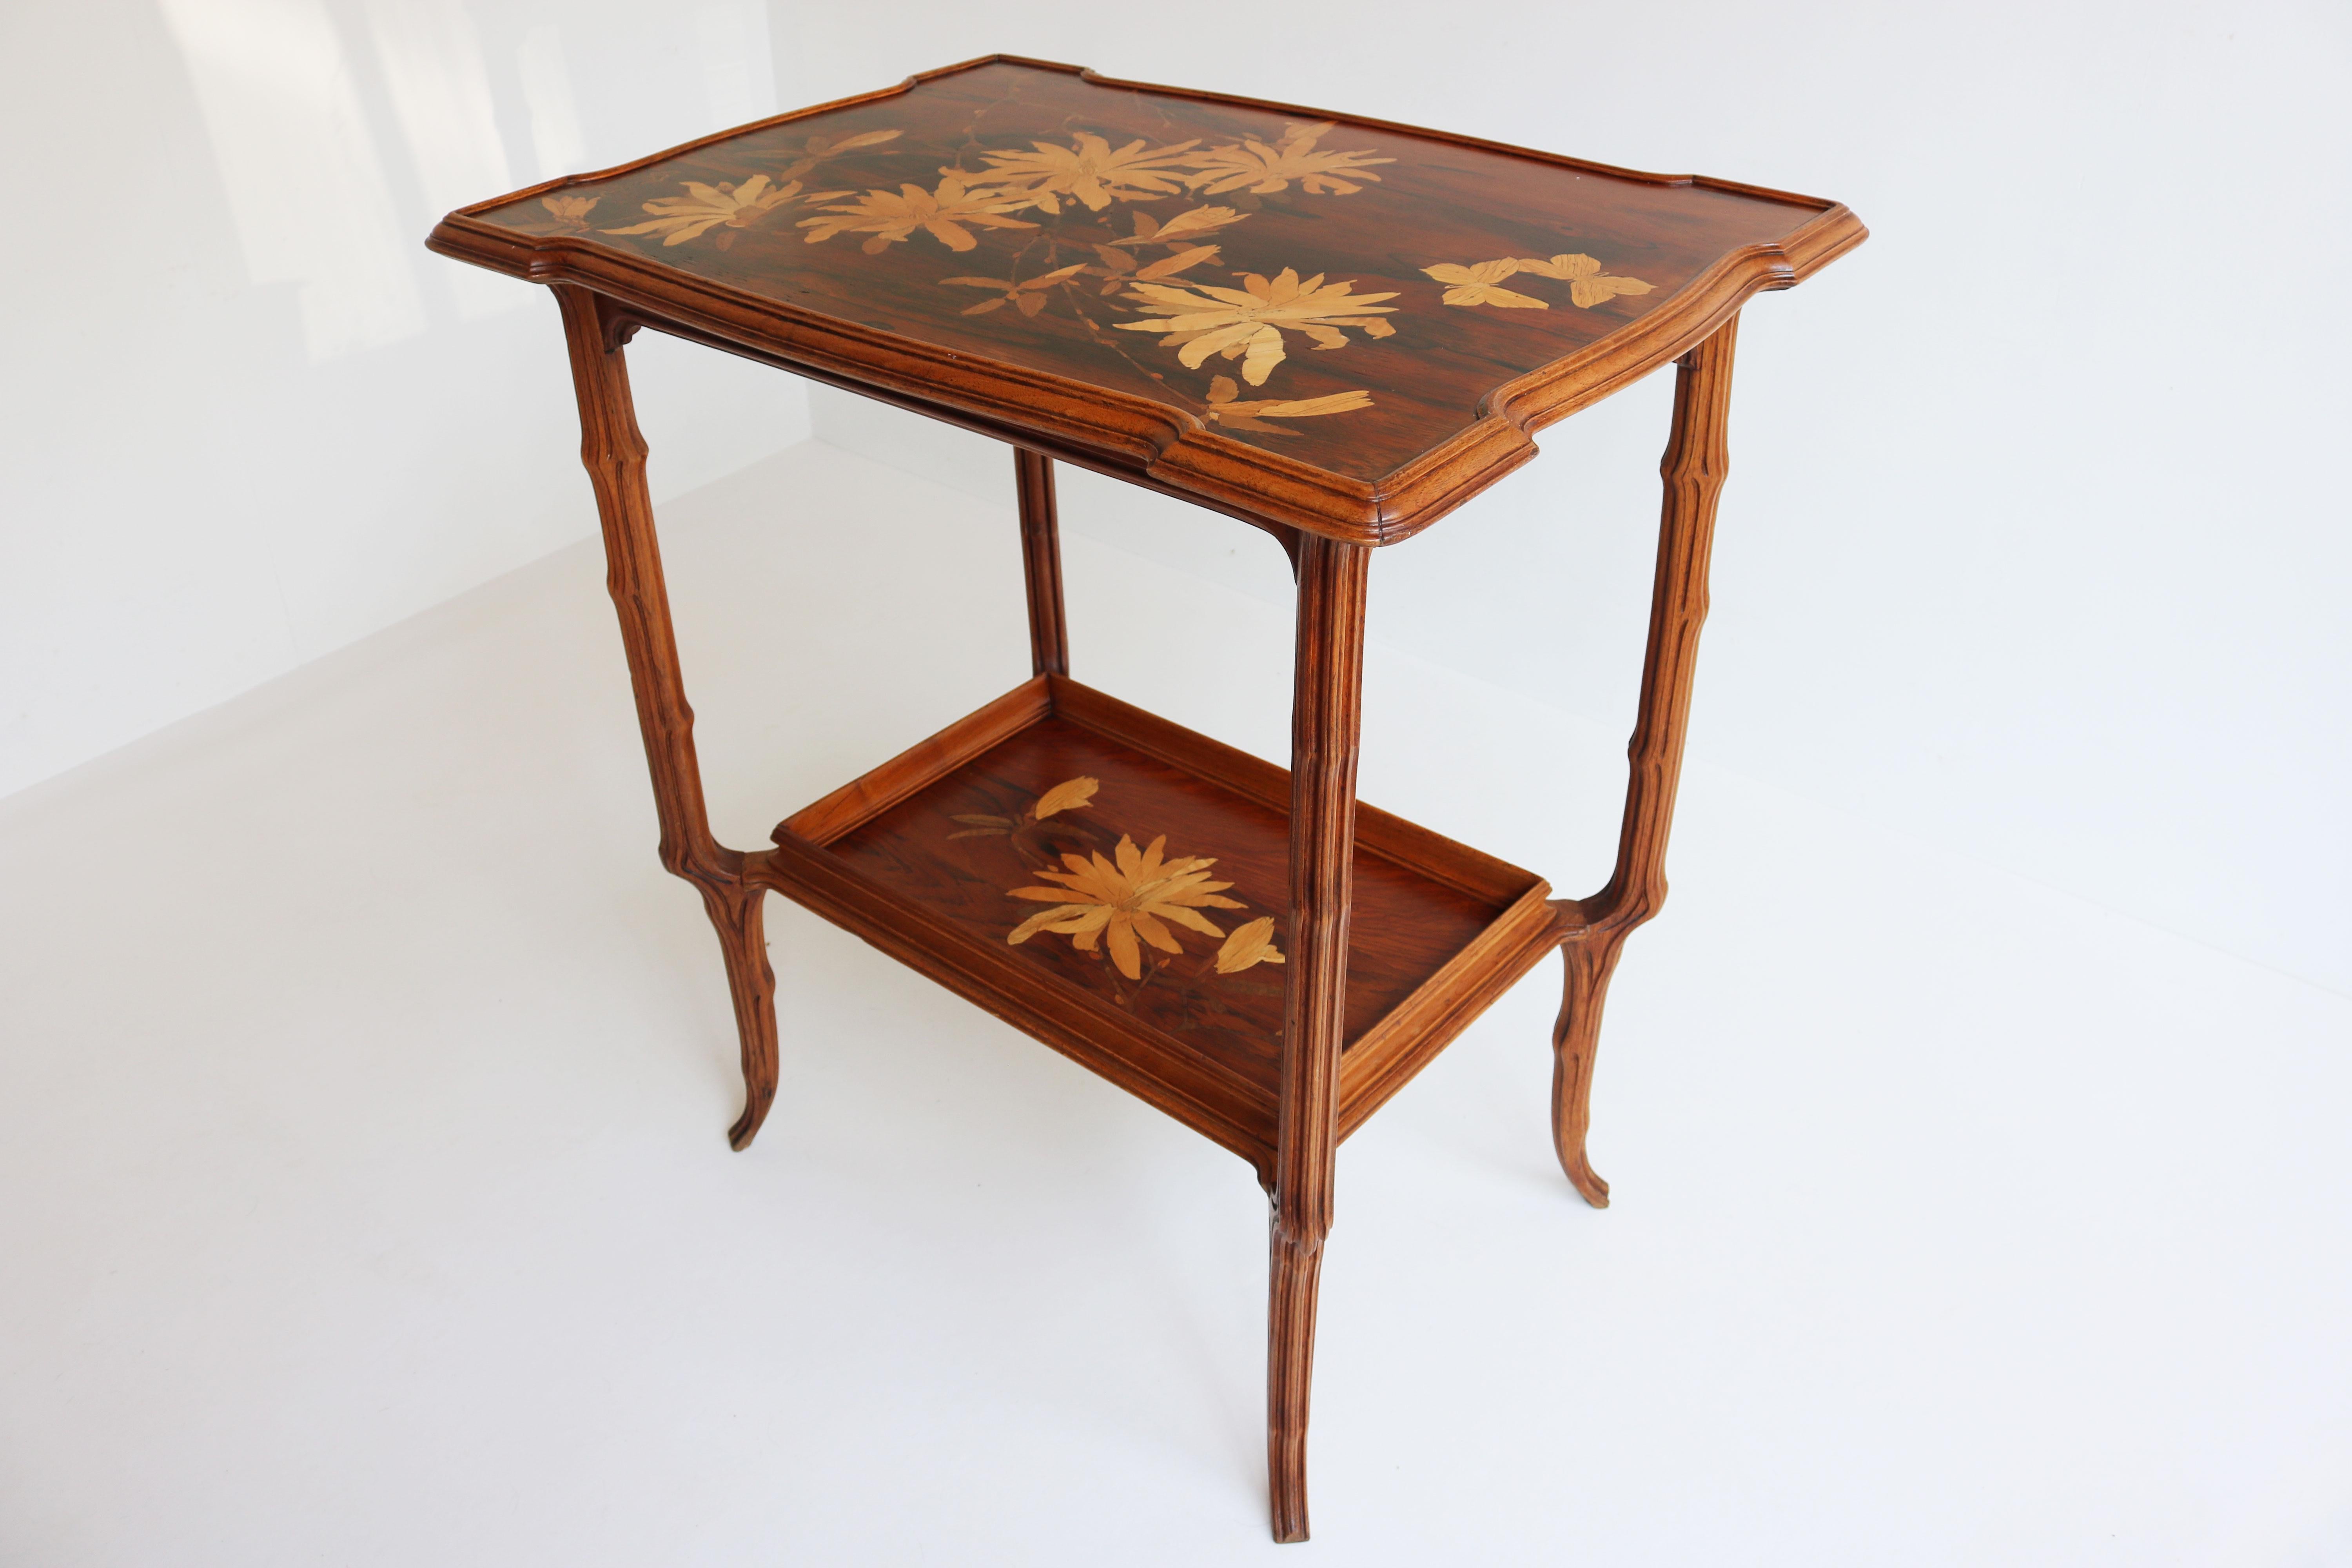 Original French Art Nouveau Marquetry Table ''Japonisme'' by Emile Galle 1900 For Sale 1